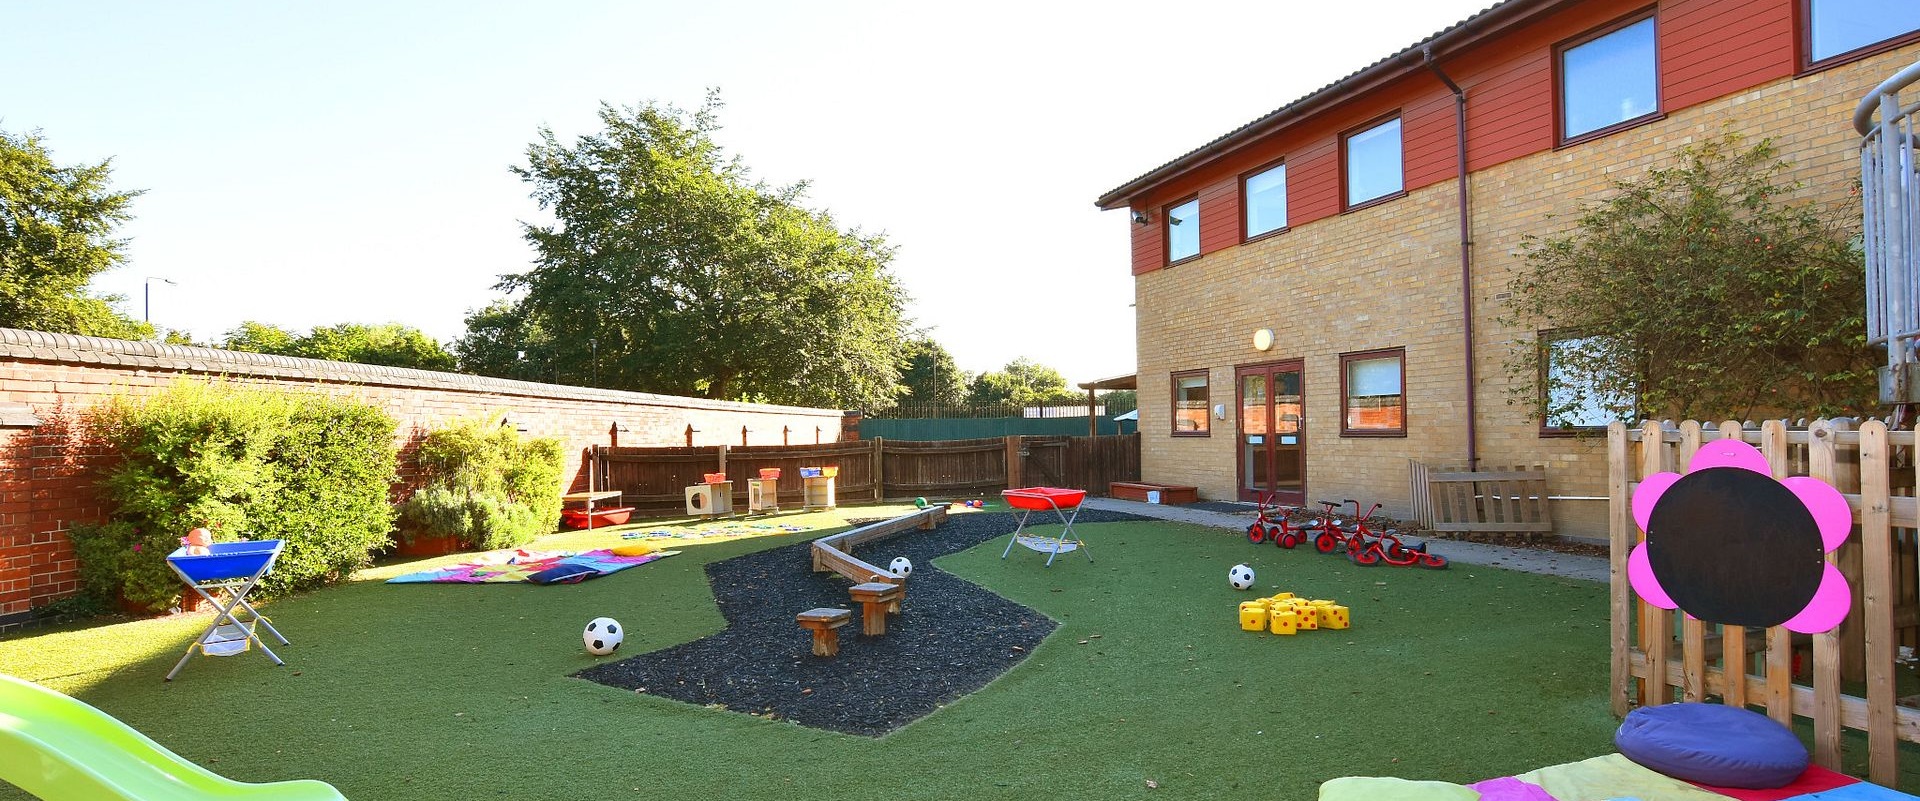 Bright Horizons Tooting Looking Glass Day Nursery and Preschool